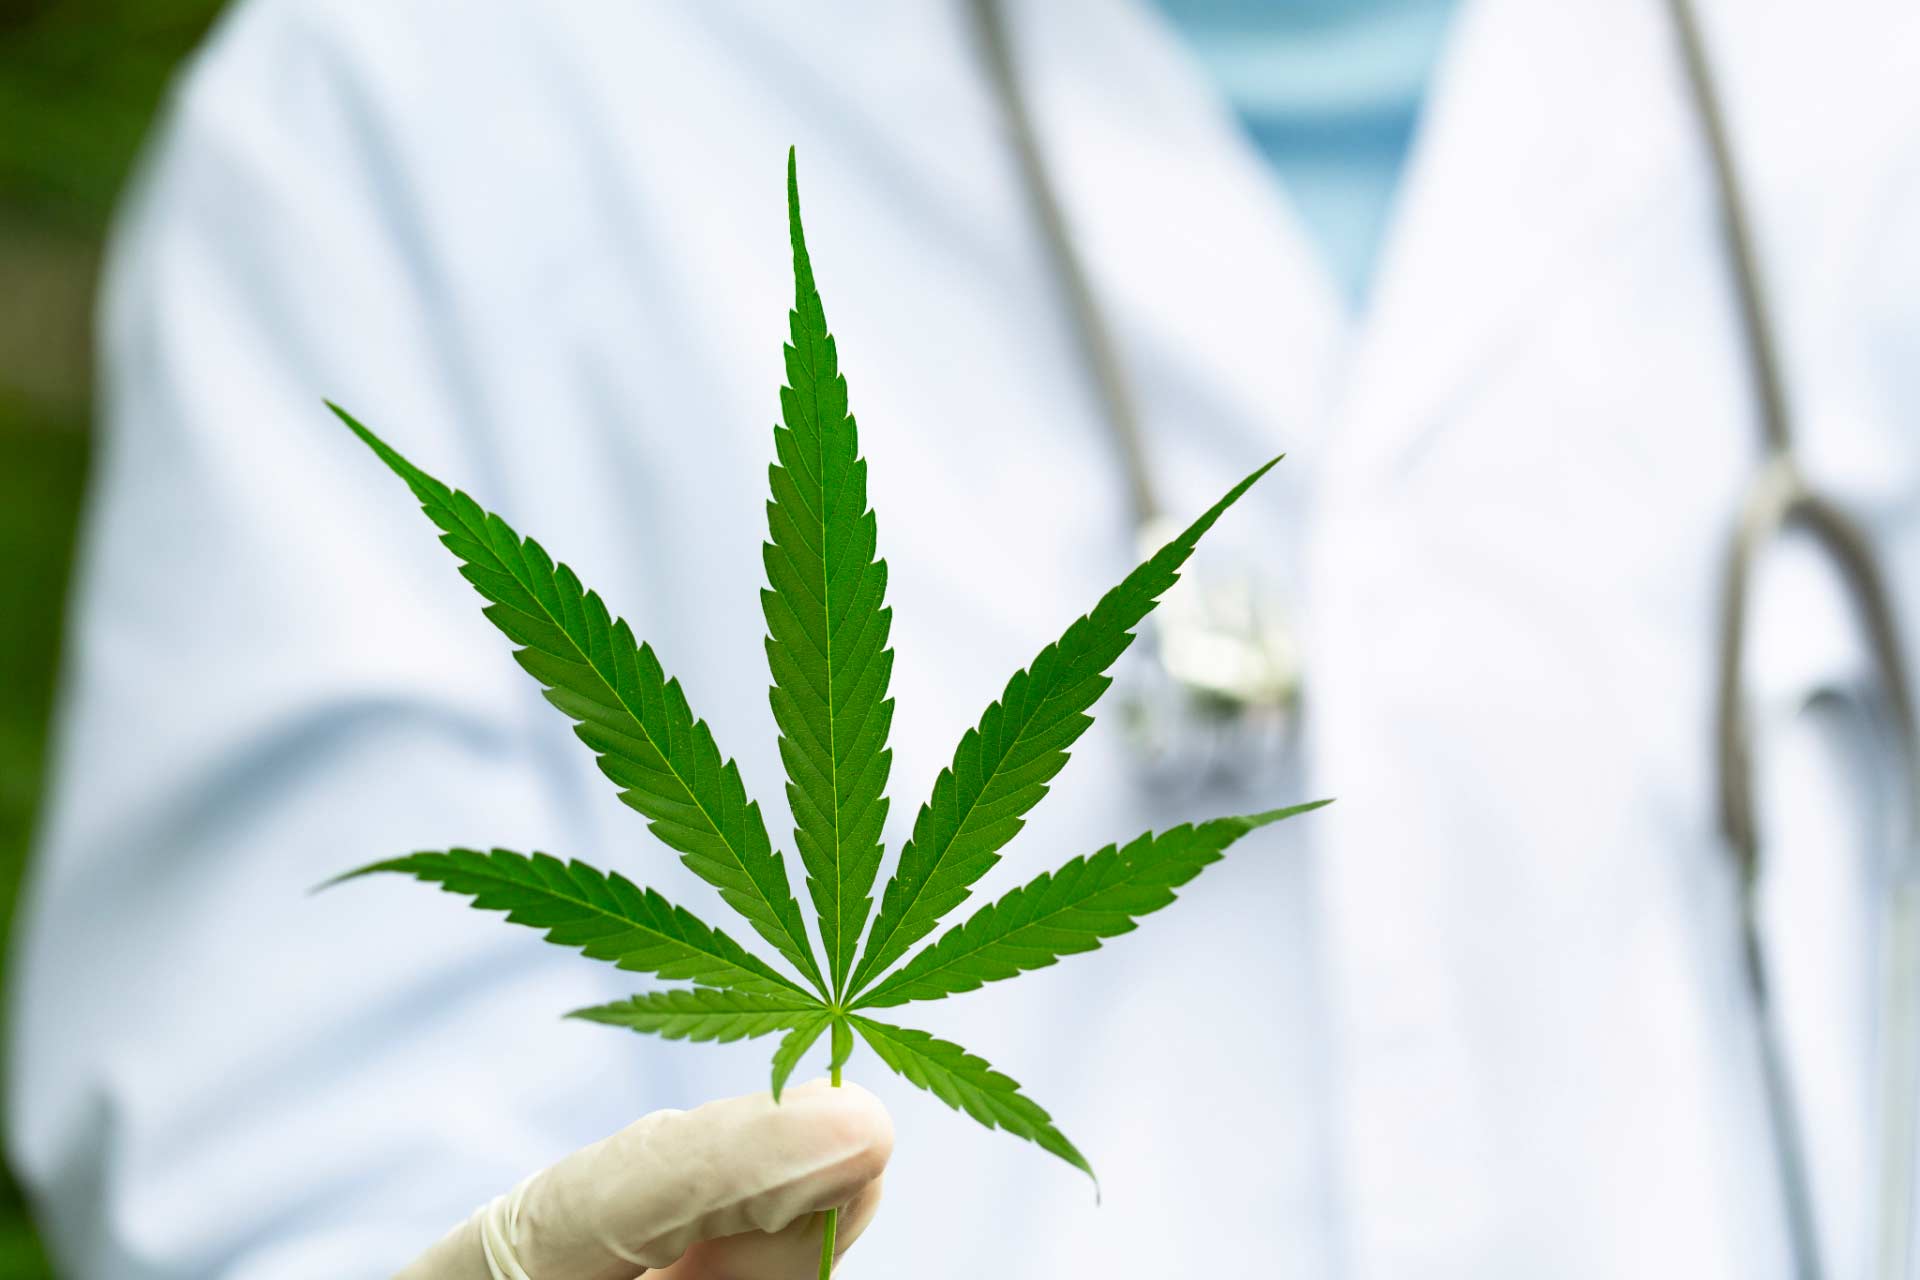 Cannabis leaf in foreground, being held by a medical marijuana doctor.